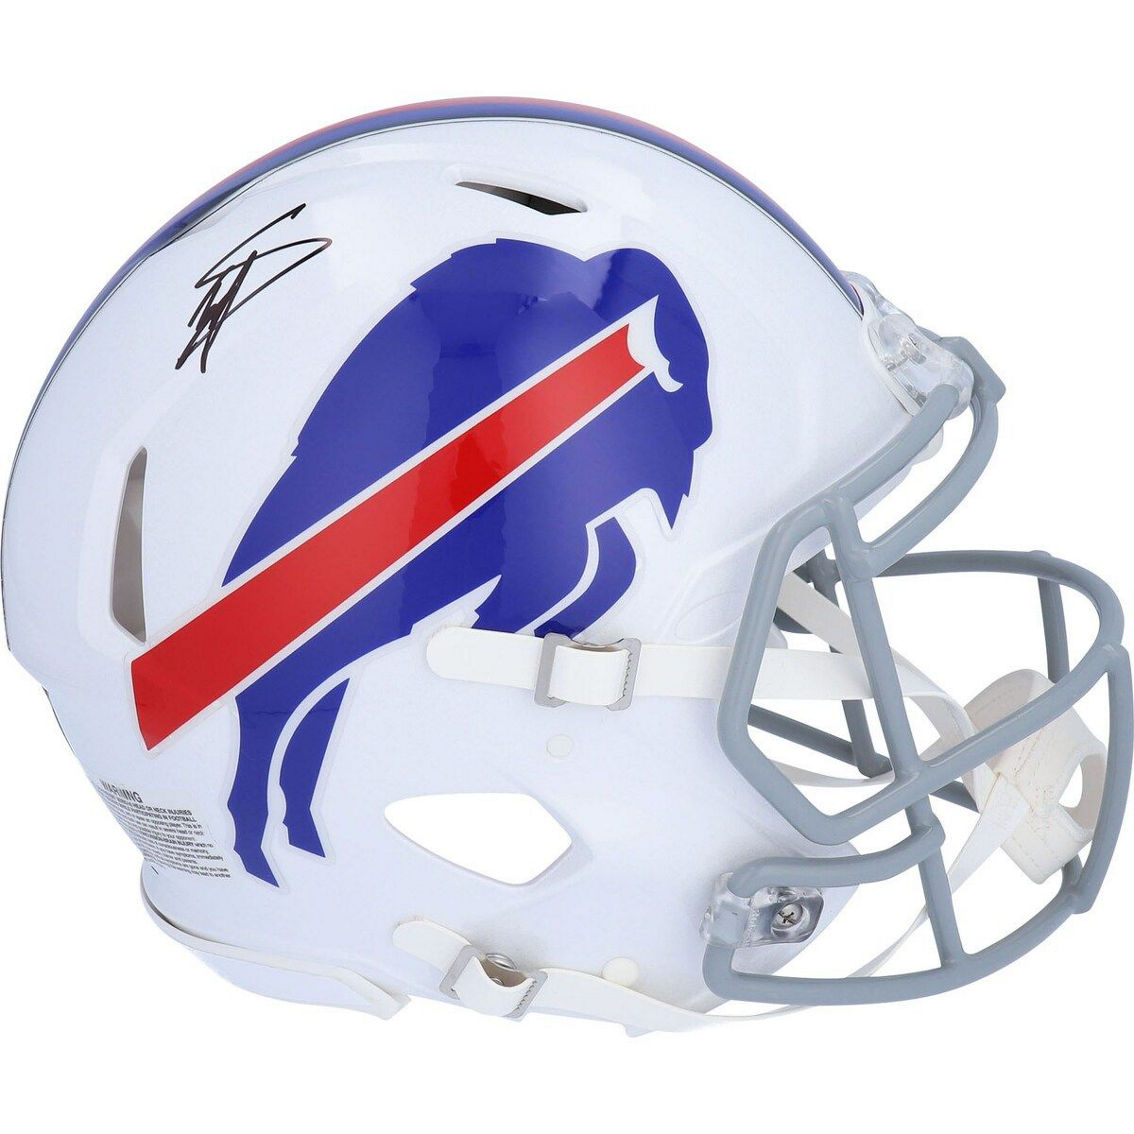 Fanatics Authentic Stefon Diggs Buffalo Bills Autographed Riddell Speed Authentic Helmet - Image 2 of 3